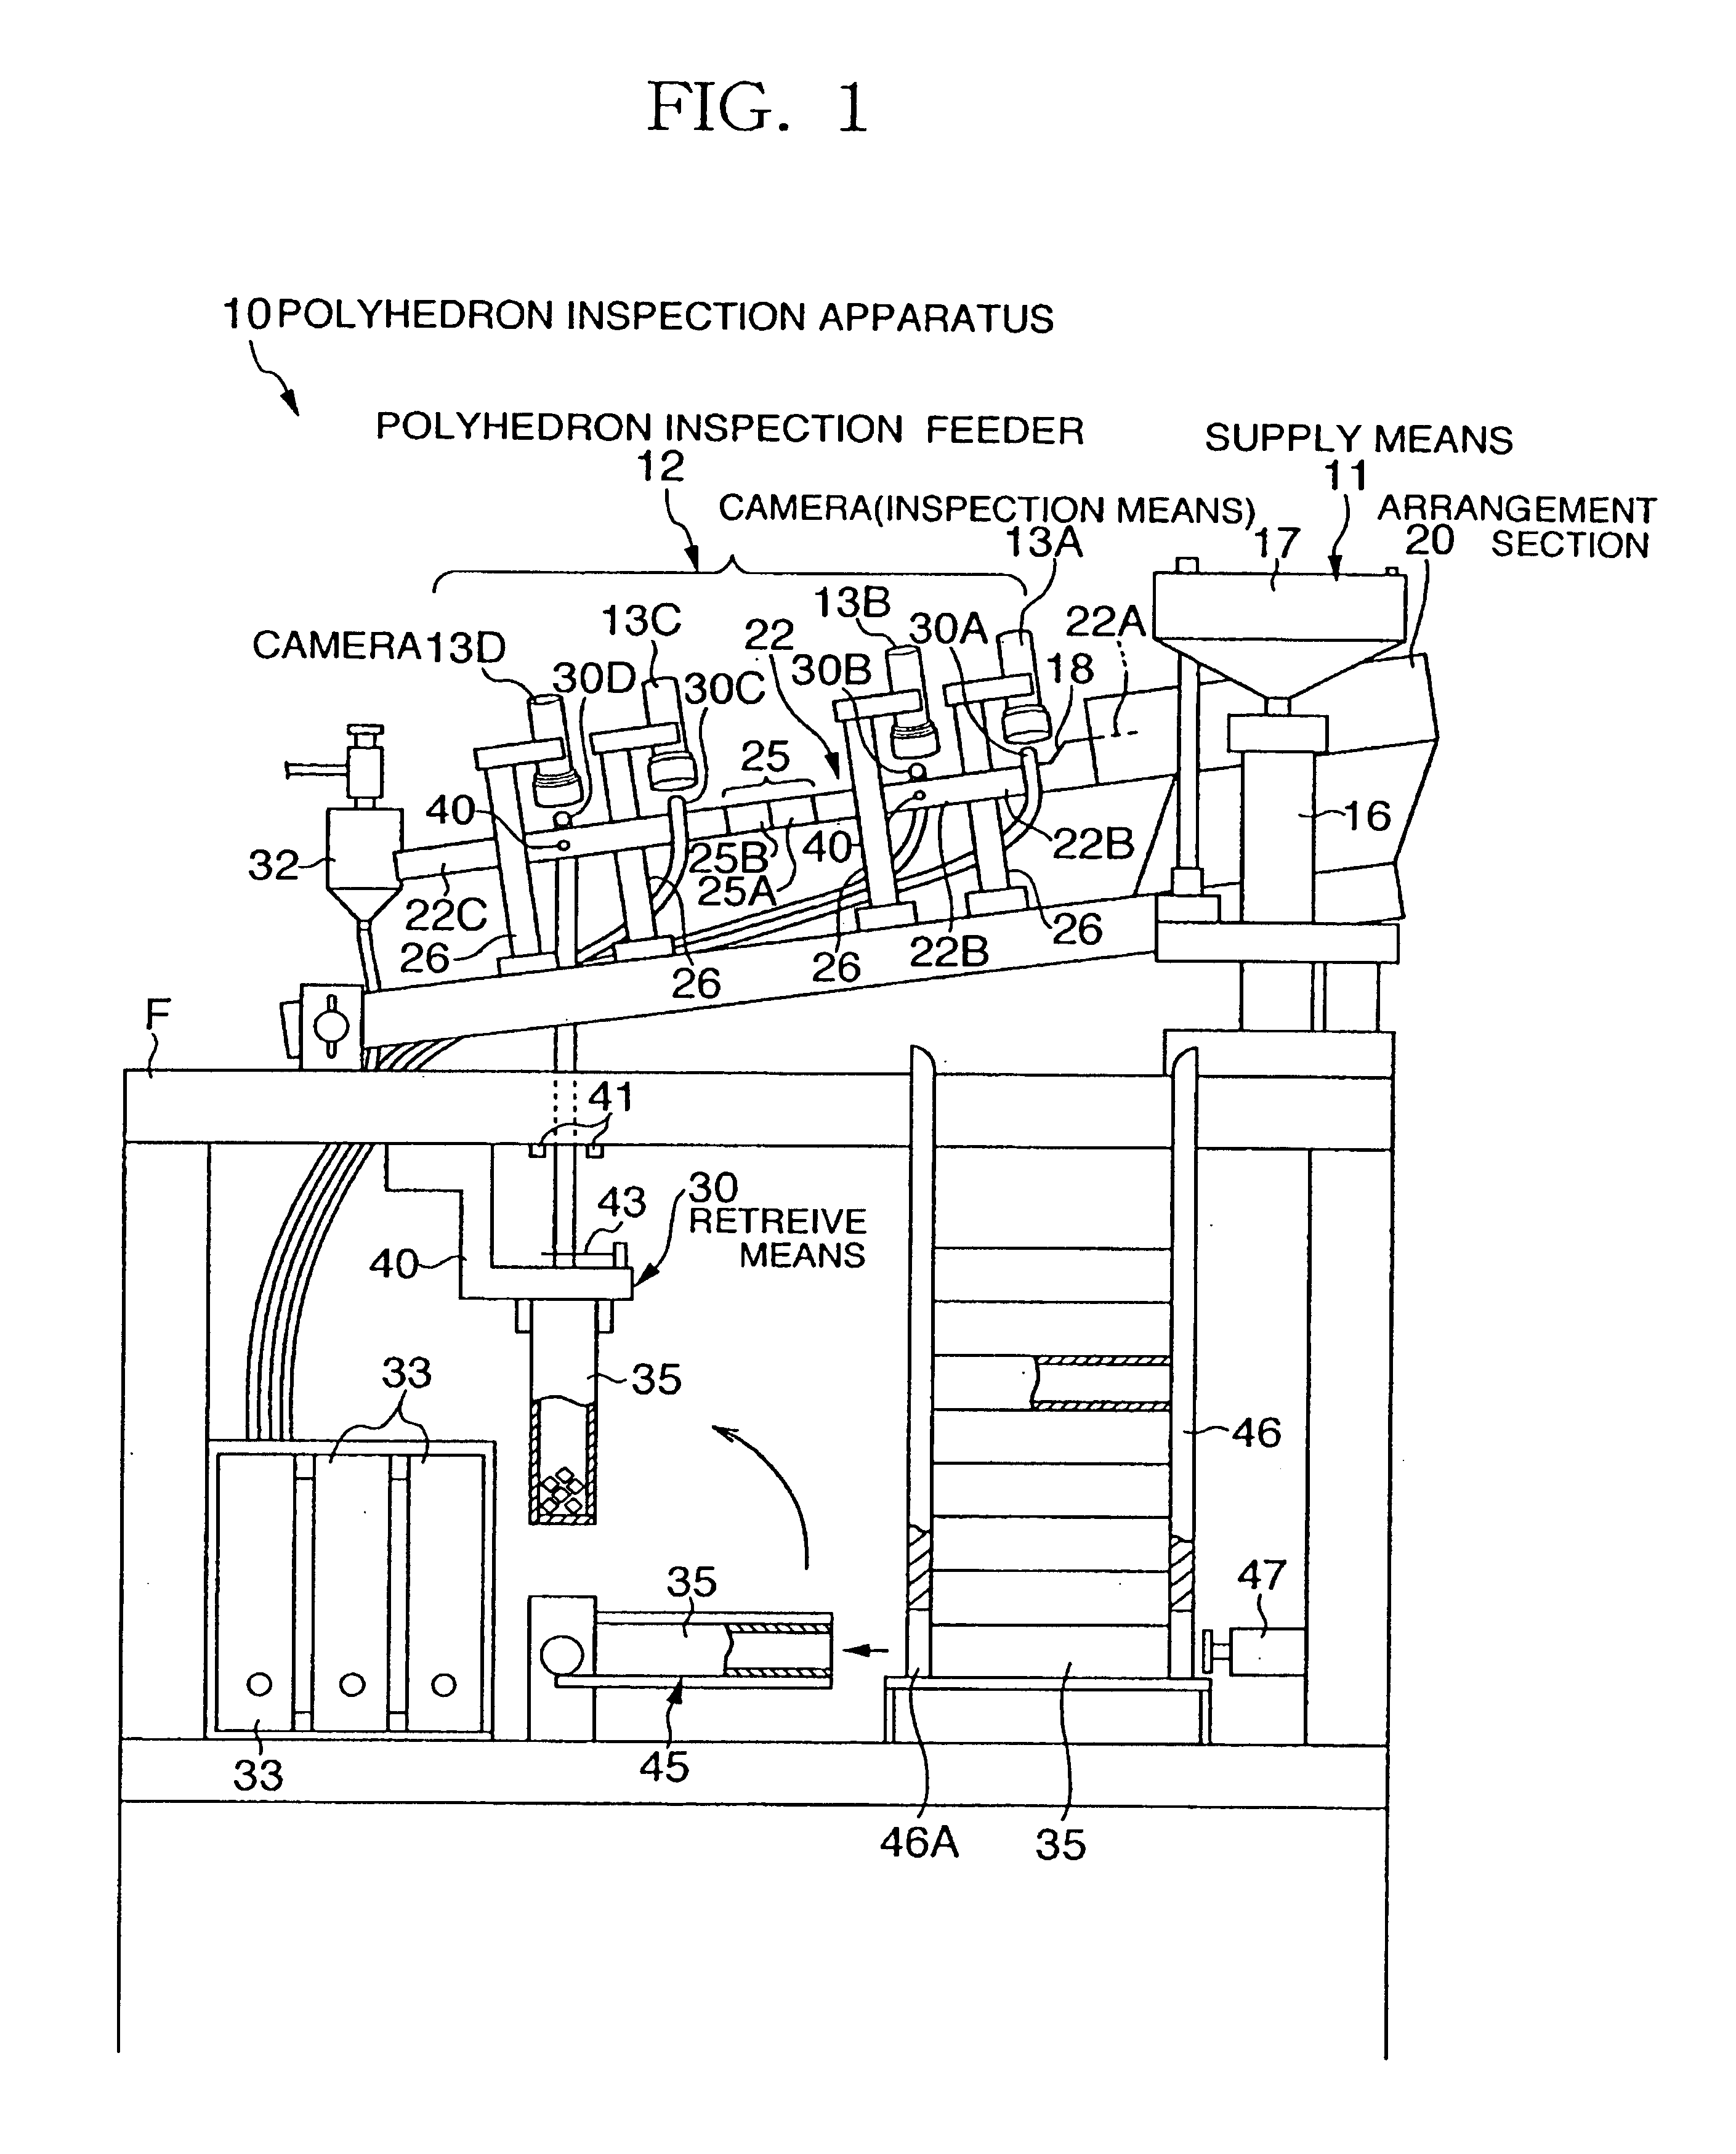 Polyhedron inspection feeder and polyhedron inspection apparatus